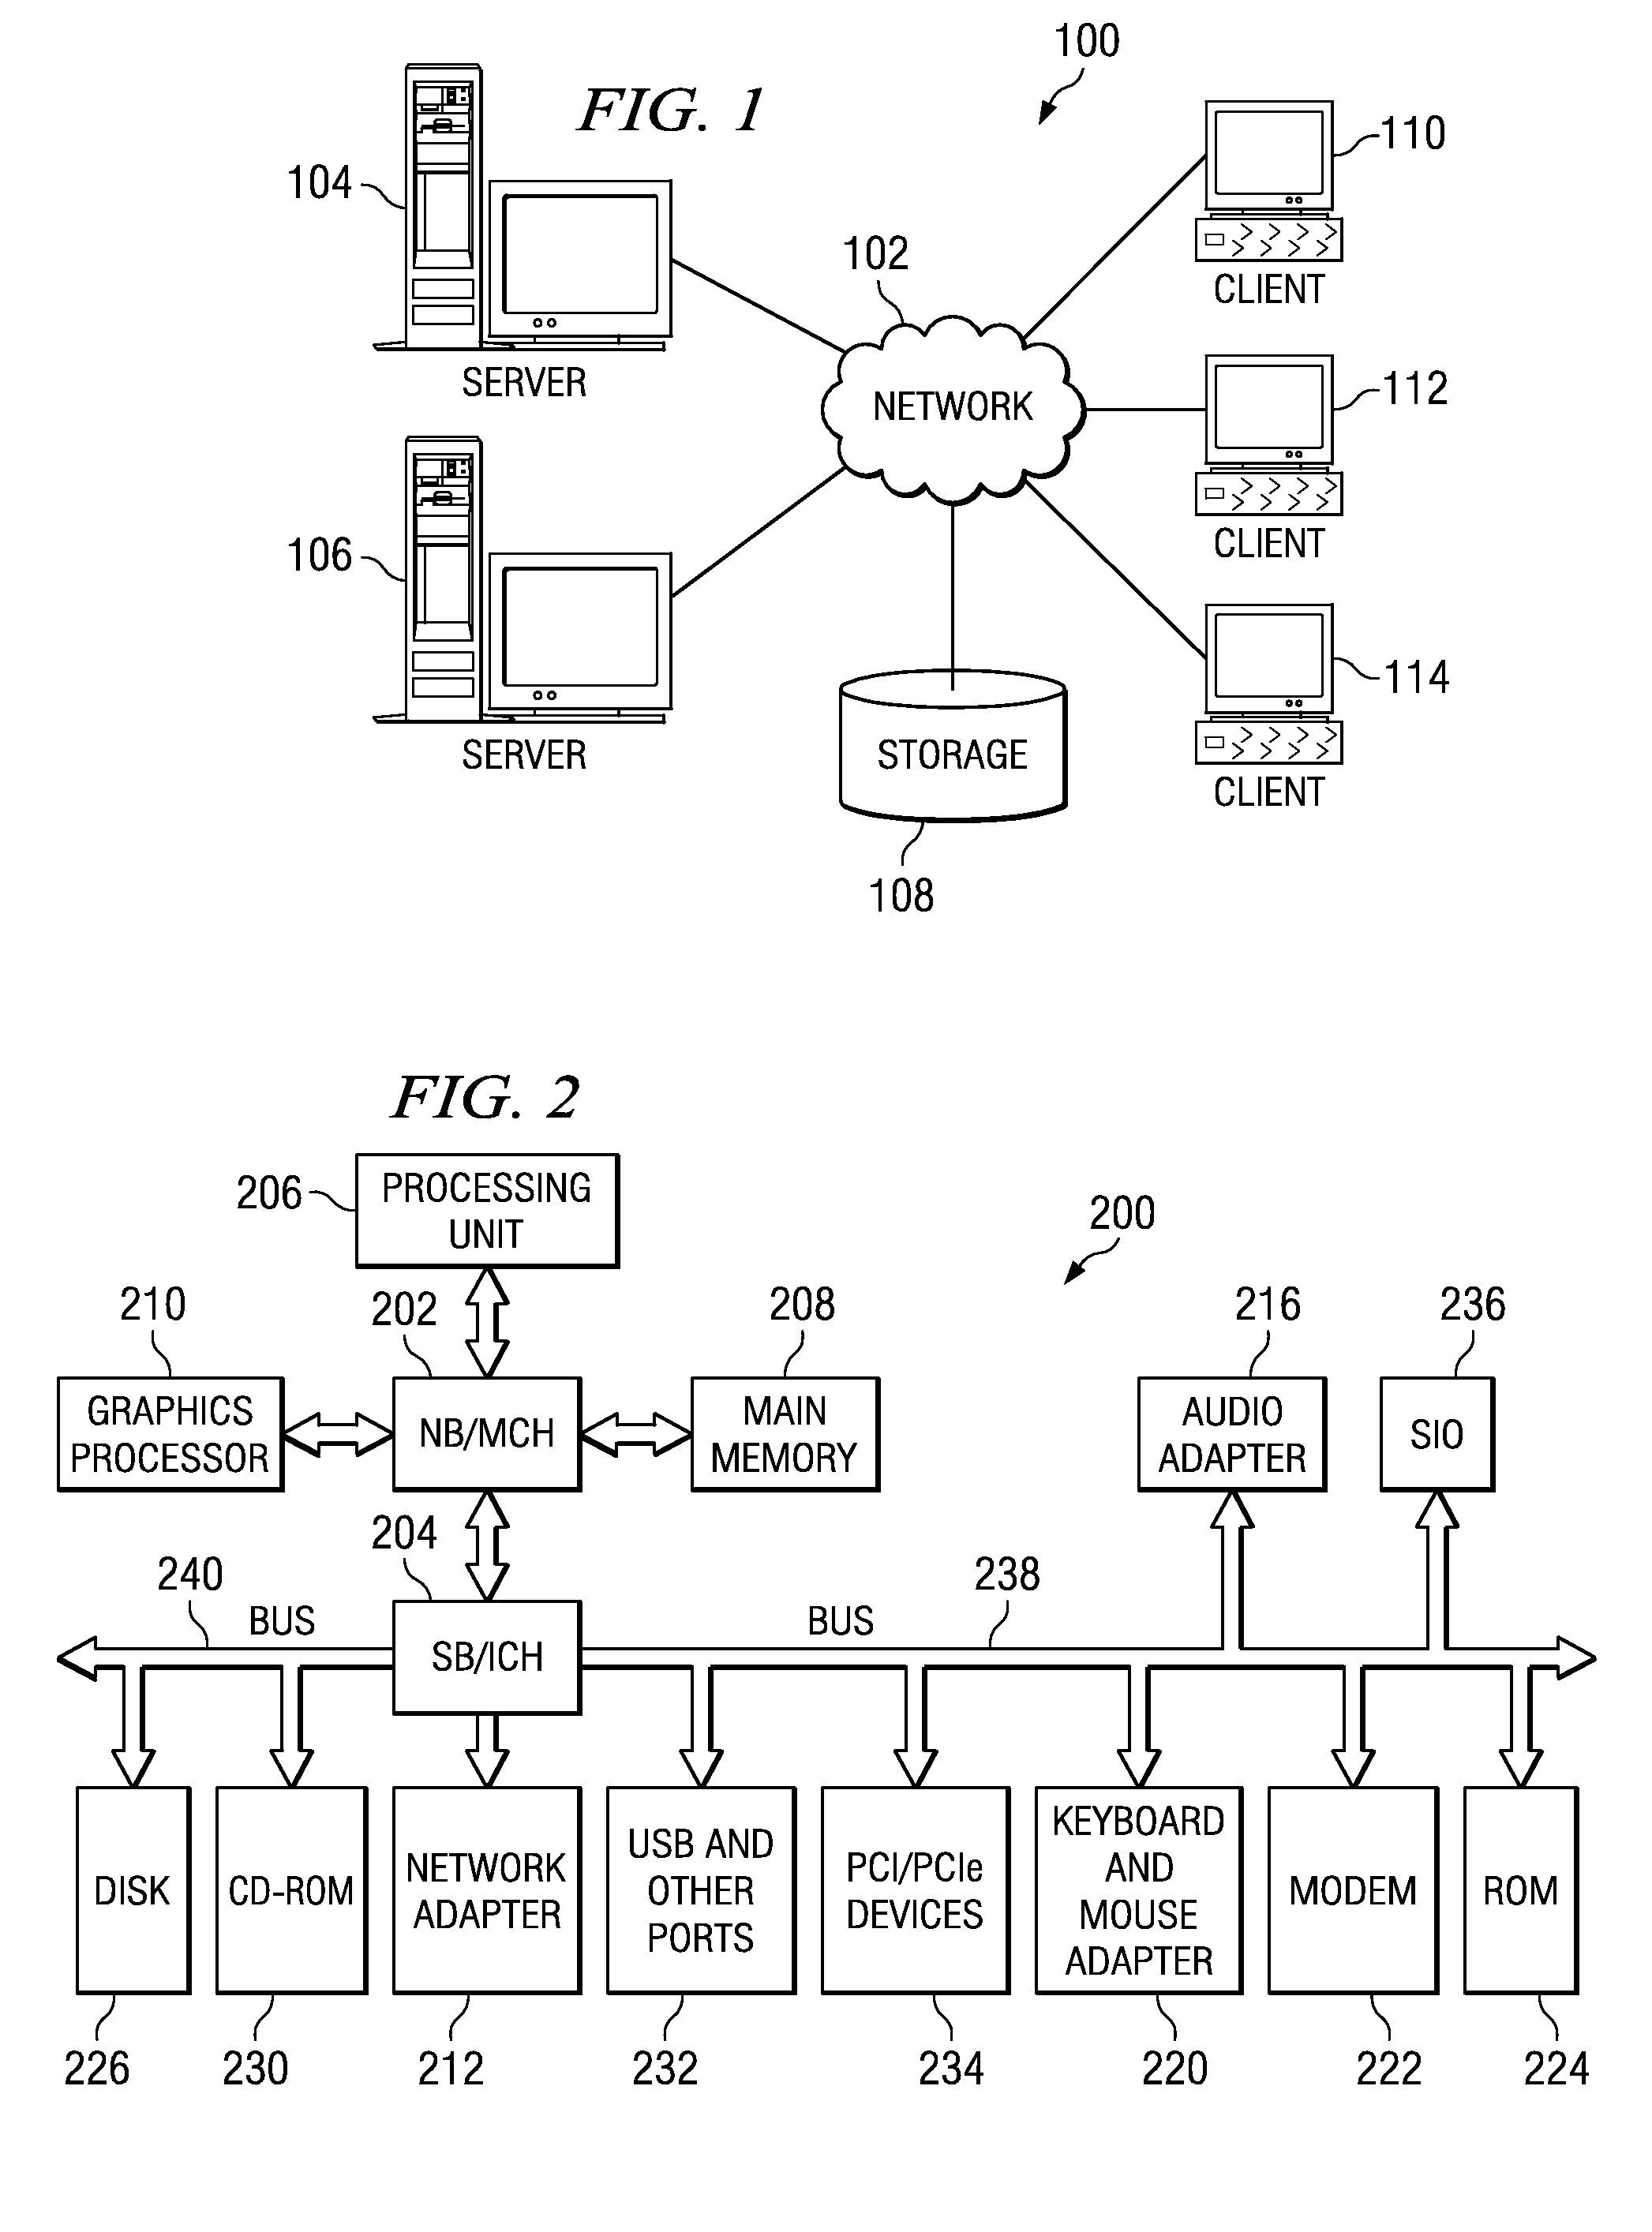 System and Method for Providing Multiple Redundant Direct Routes Between Supernodes of a Multi-Tiered Full-Graph Interconnect Architecture